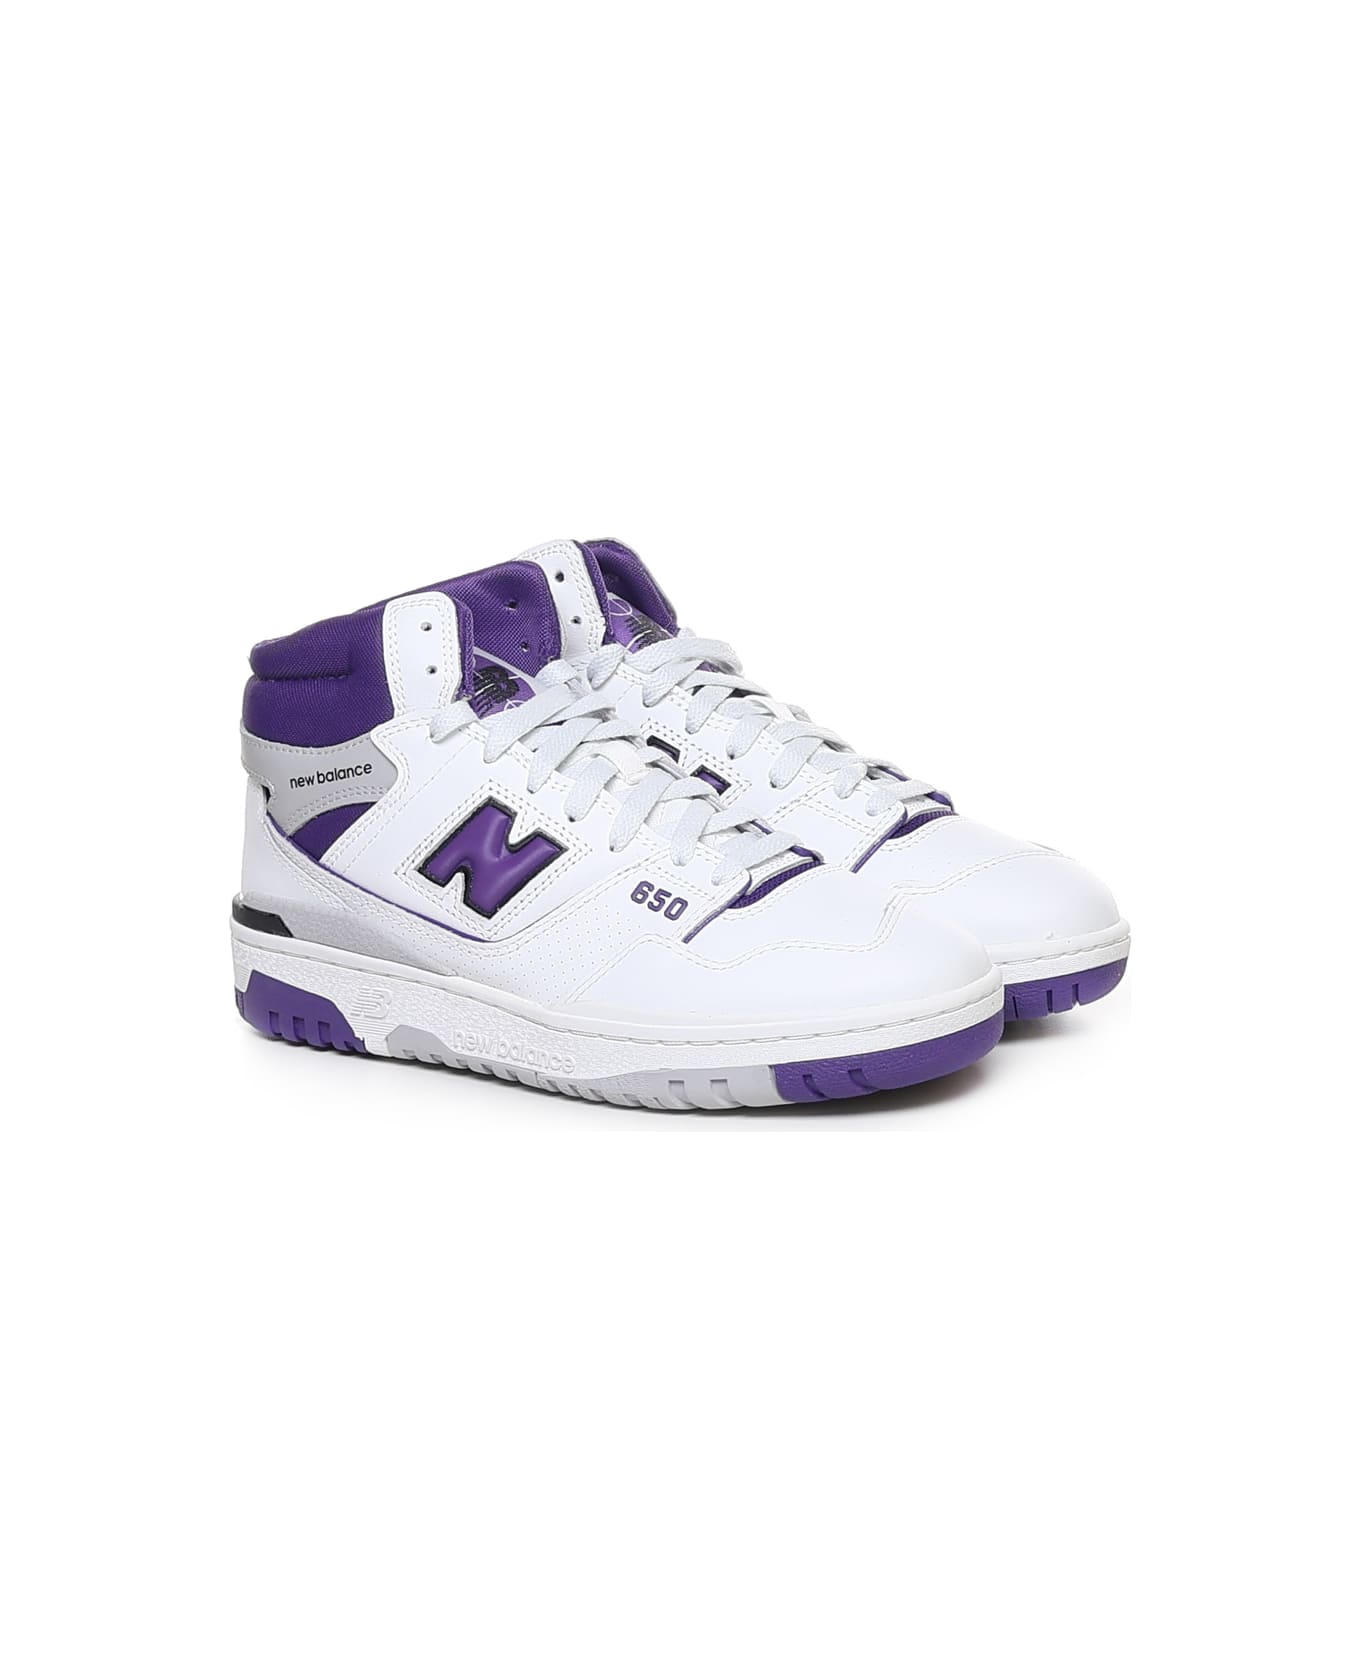 New Balance Sneakers 550 Lifestyle High - White